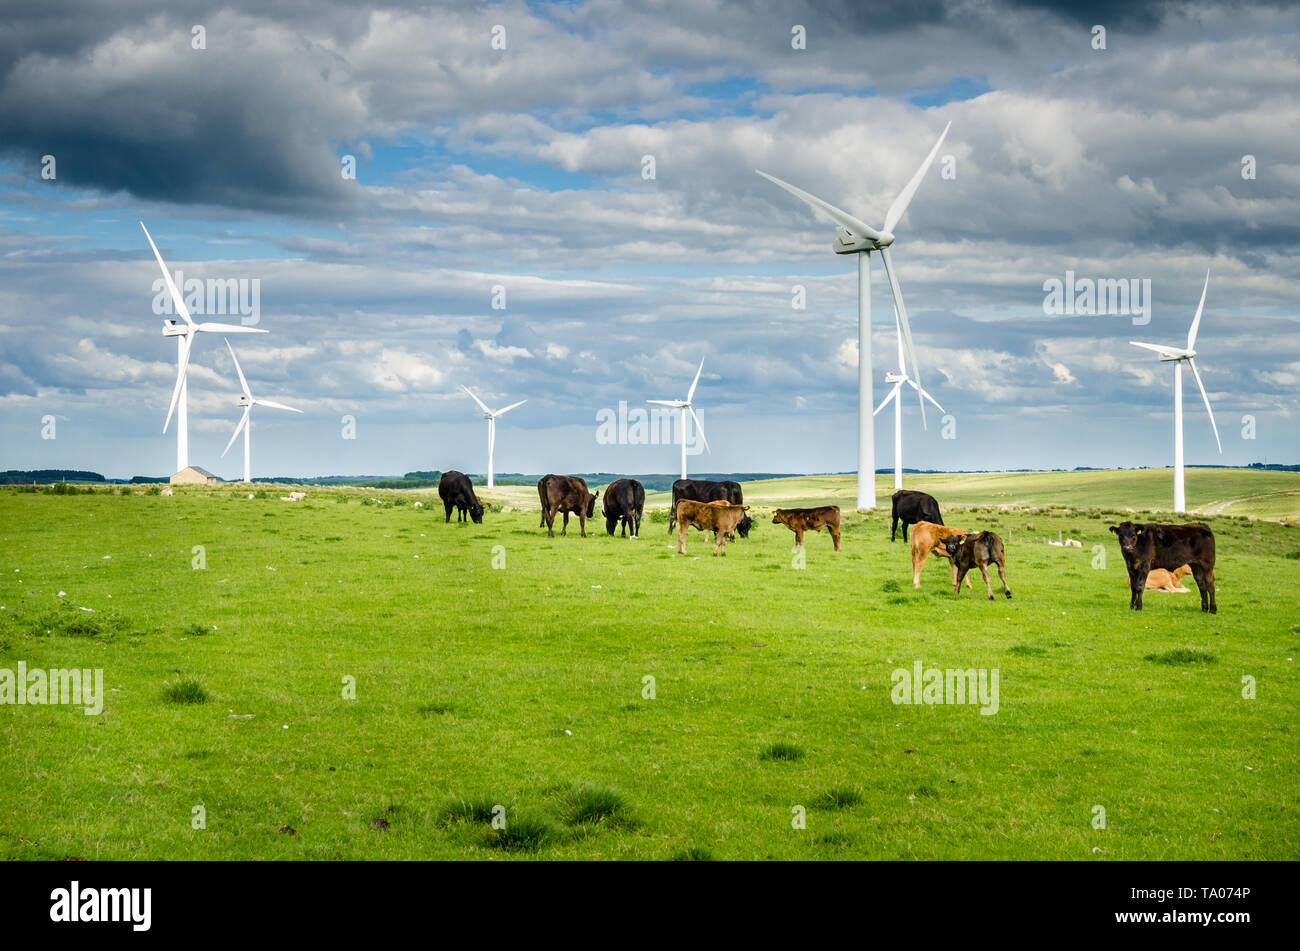 Wind turbines in a grassy field with cows grazing in Northumberland, England, on a cloudy spring day Stock Photo